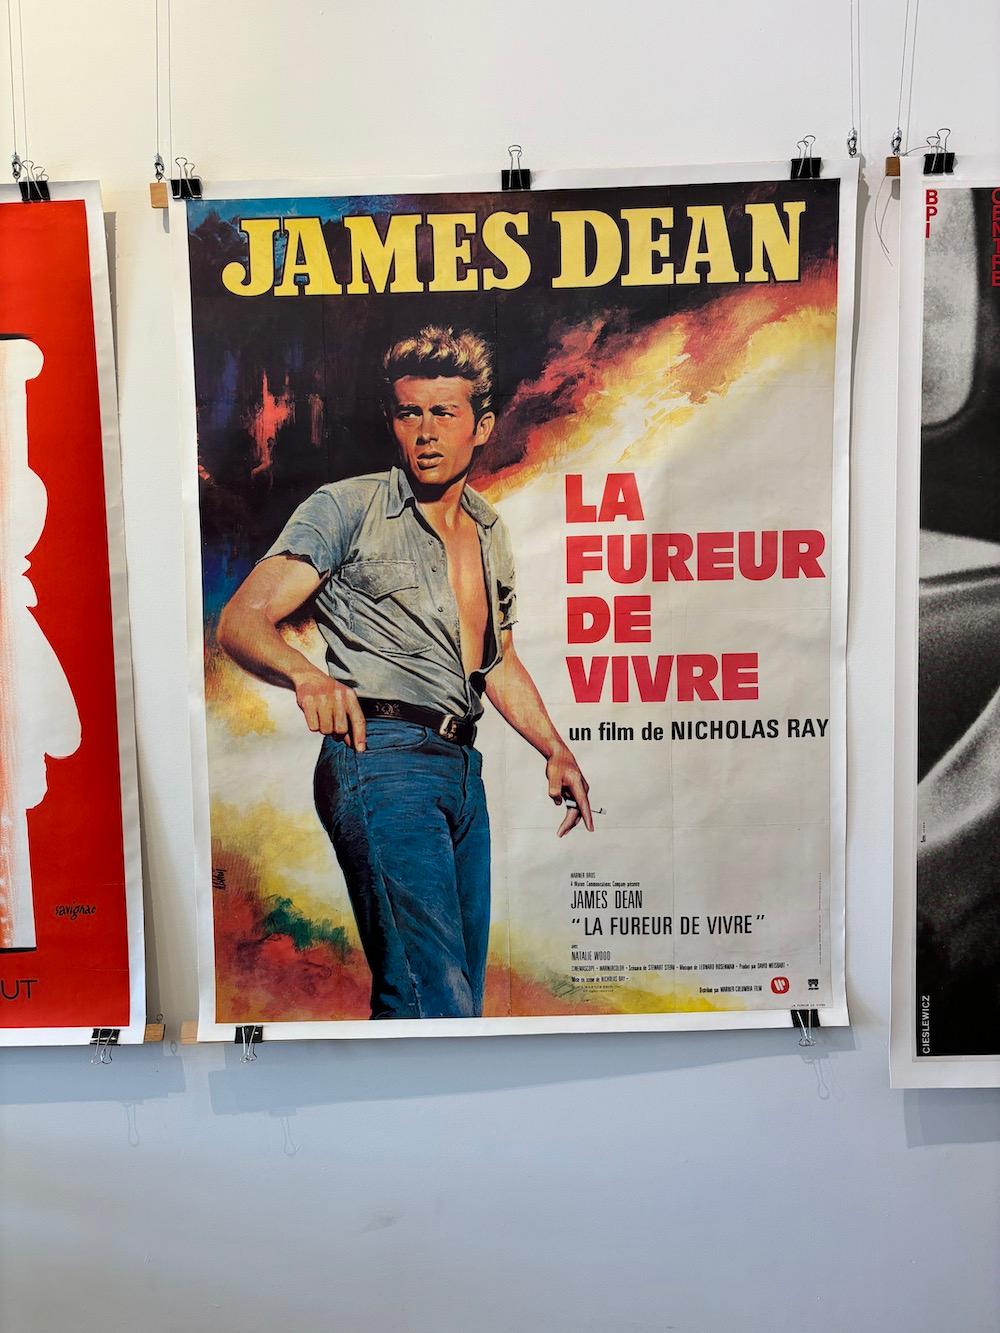  'Rebel Without a Cause' Original Vintage Retro French Film Poster, JAMES DEAN In Good Condition For Sale In Melbourne, Victoria